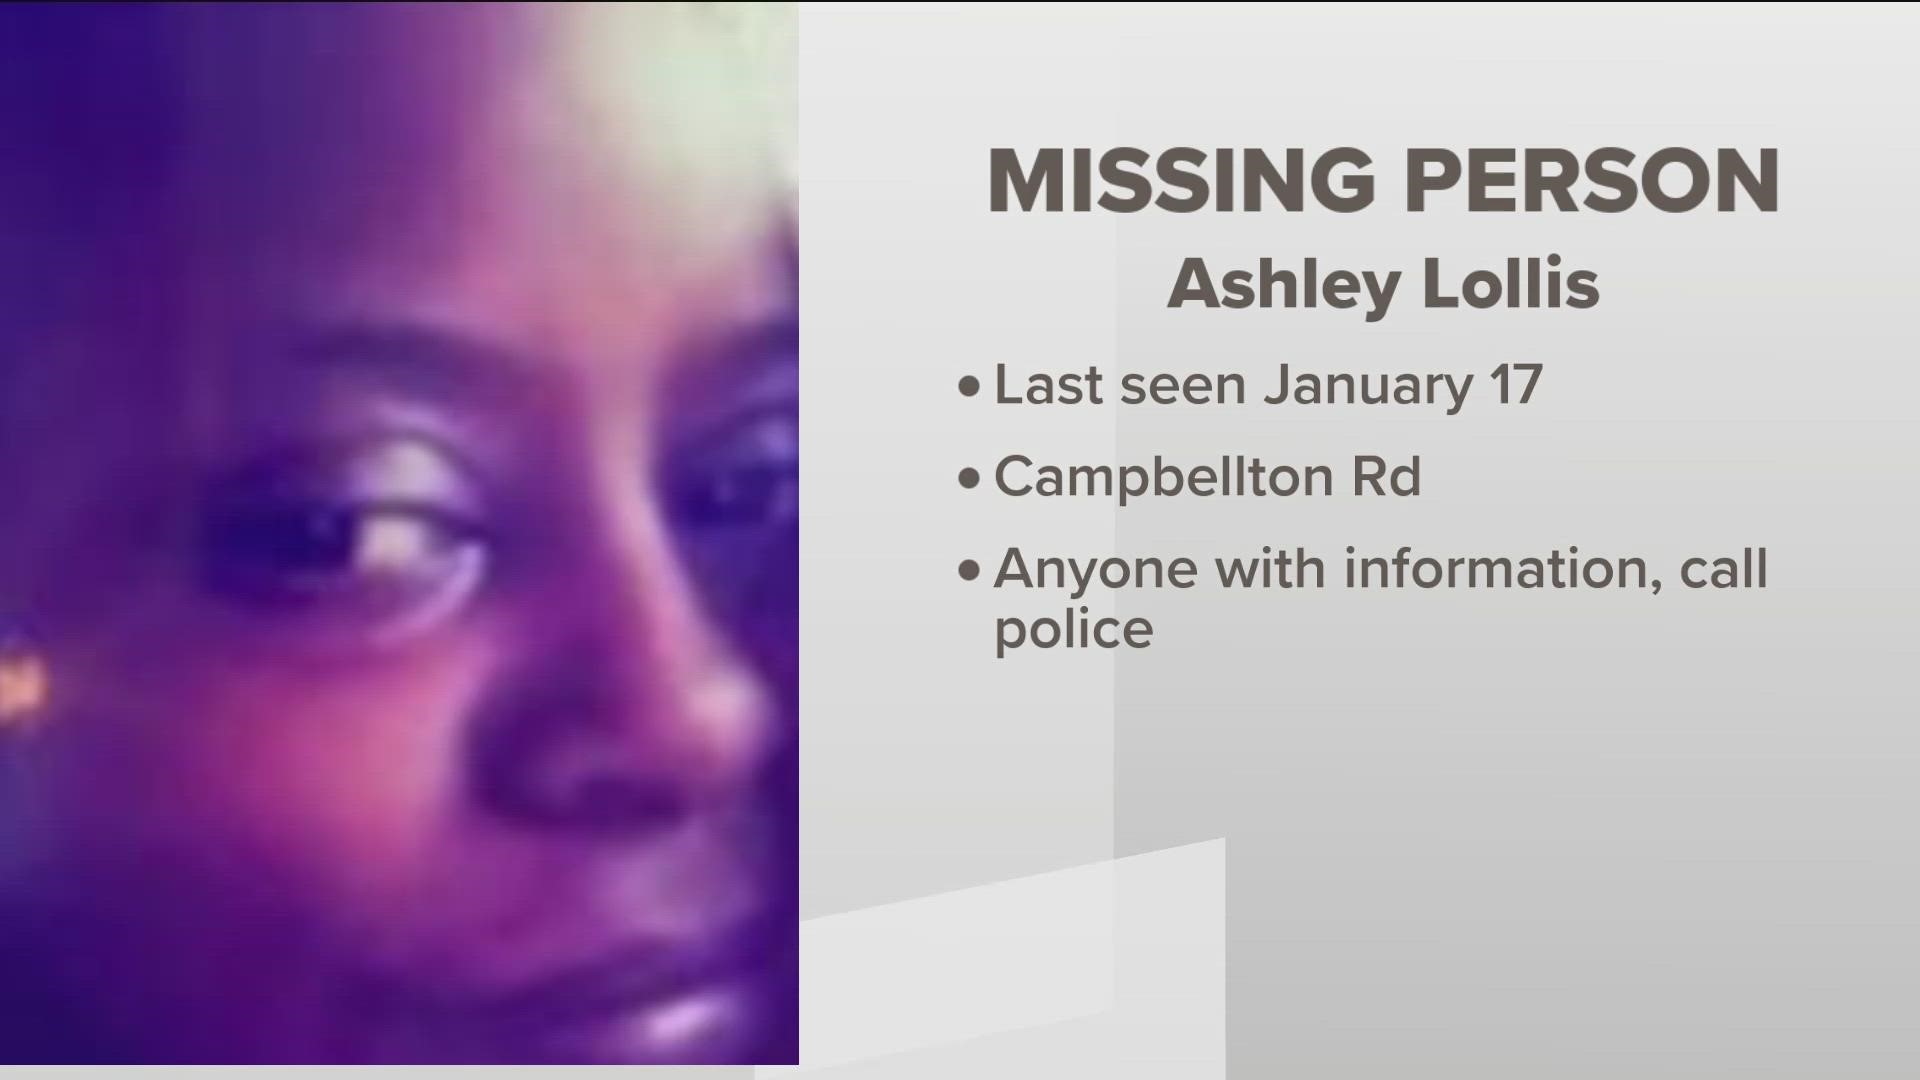 Ashley Lollis has been missing for over a month. She was last seen Jan. 17 near Campbellton Road.